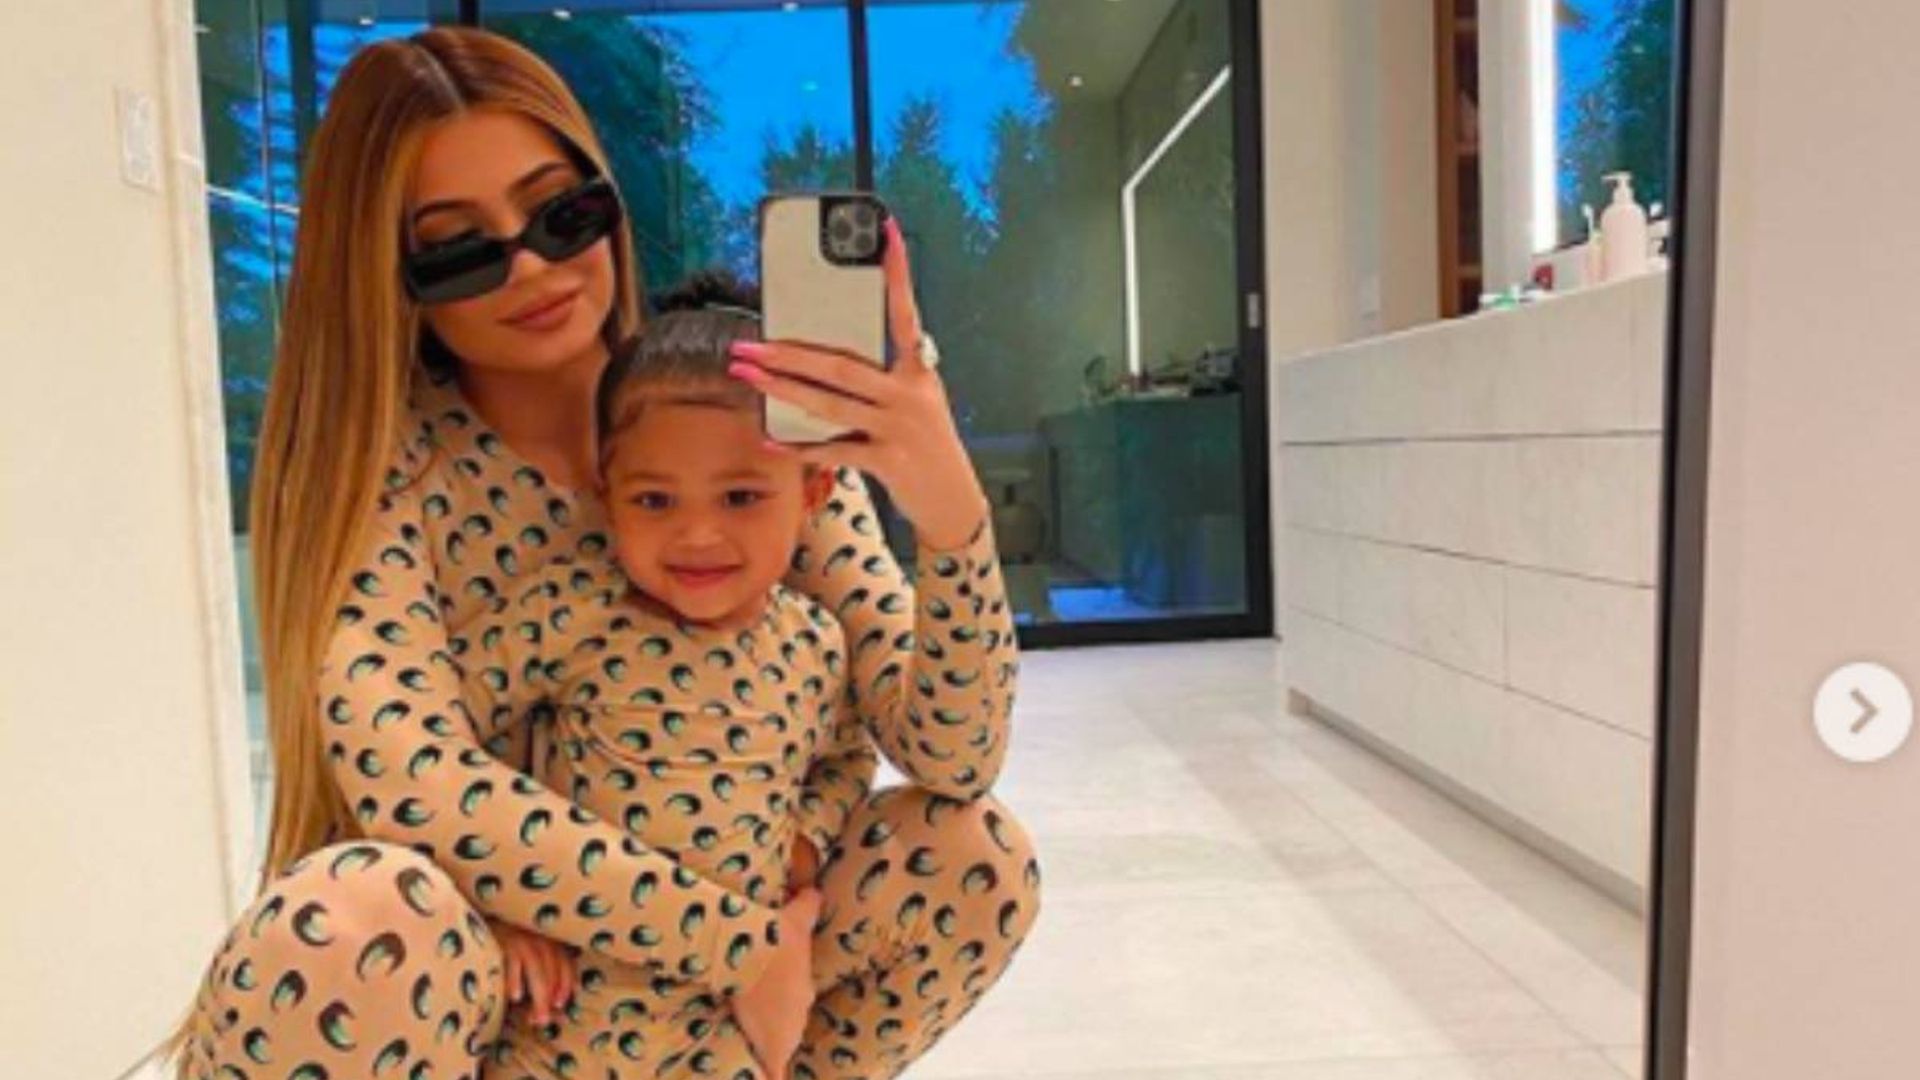 Kylie Jenner's daughter Stormi has an incredible new playroom - complete with crafts corner